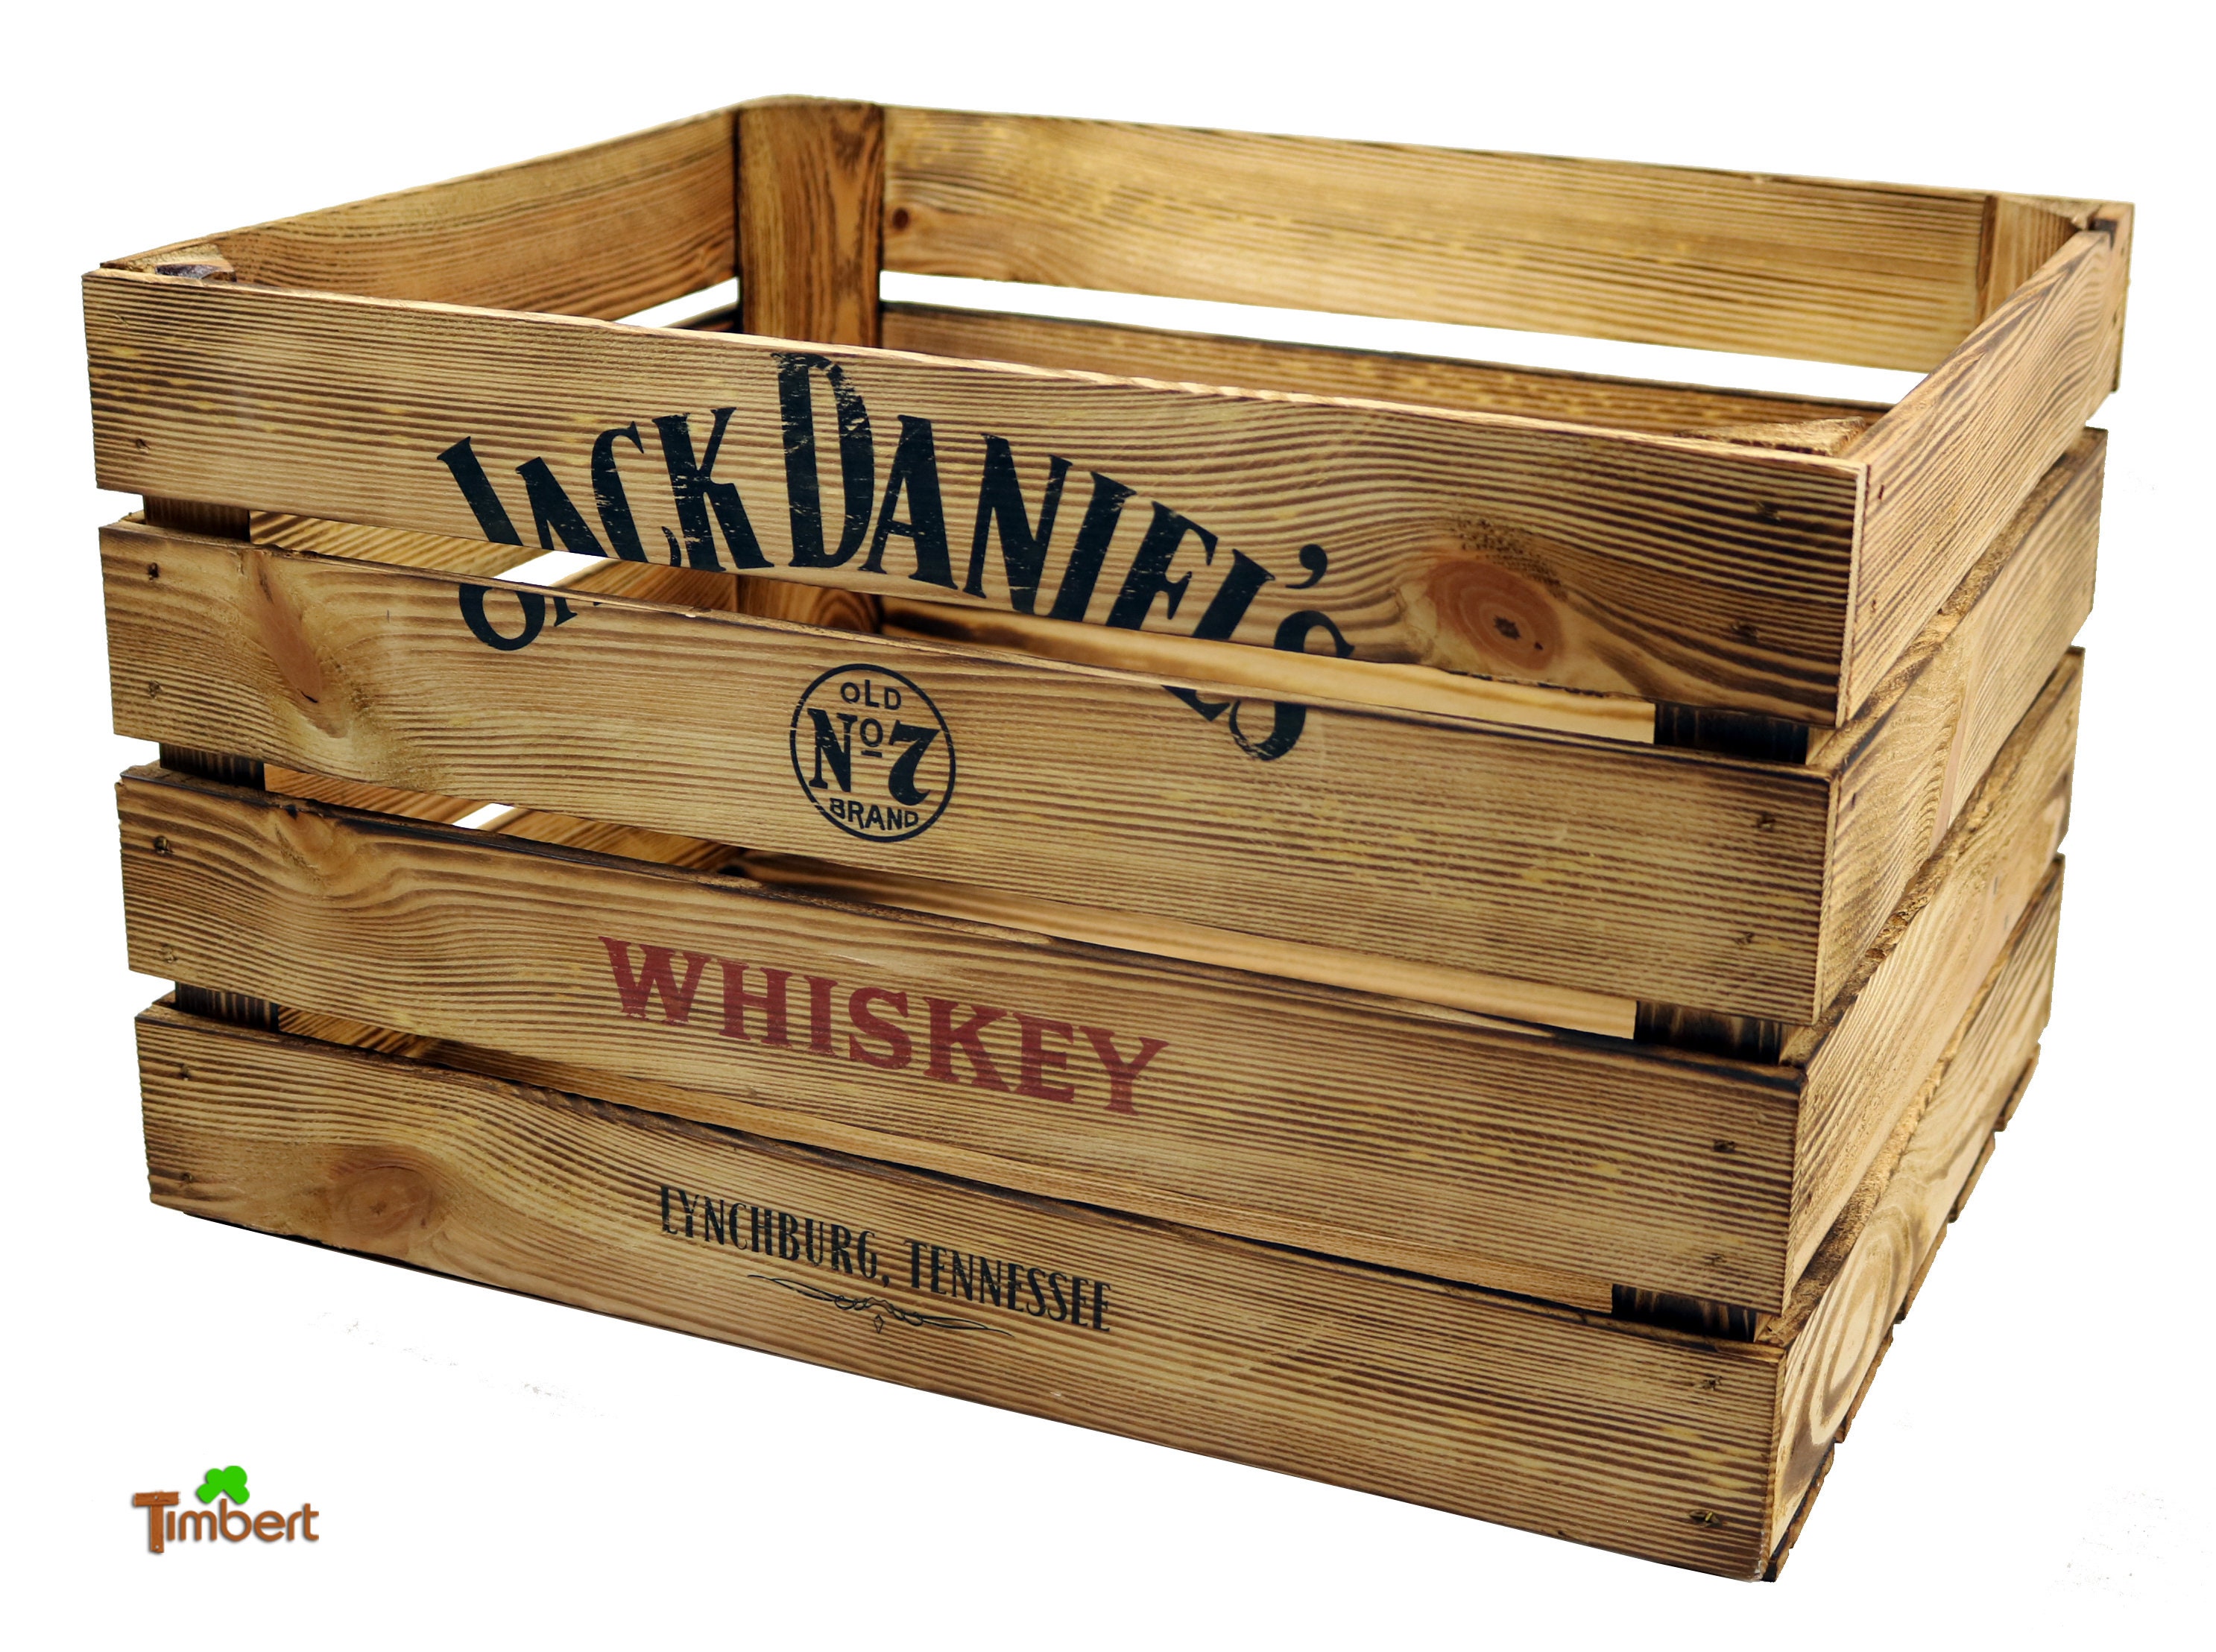 VINTAGE WHISKEY BOX Wooden Box With Whiskey Branding Rustic Gift Box Book  Box Drinks Box Bar Gift Men Father's Day Decorative Box 